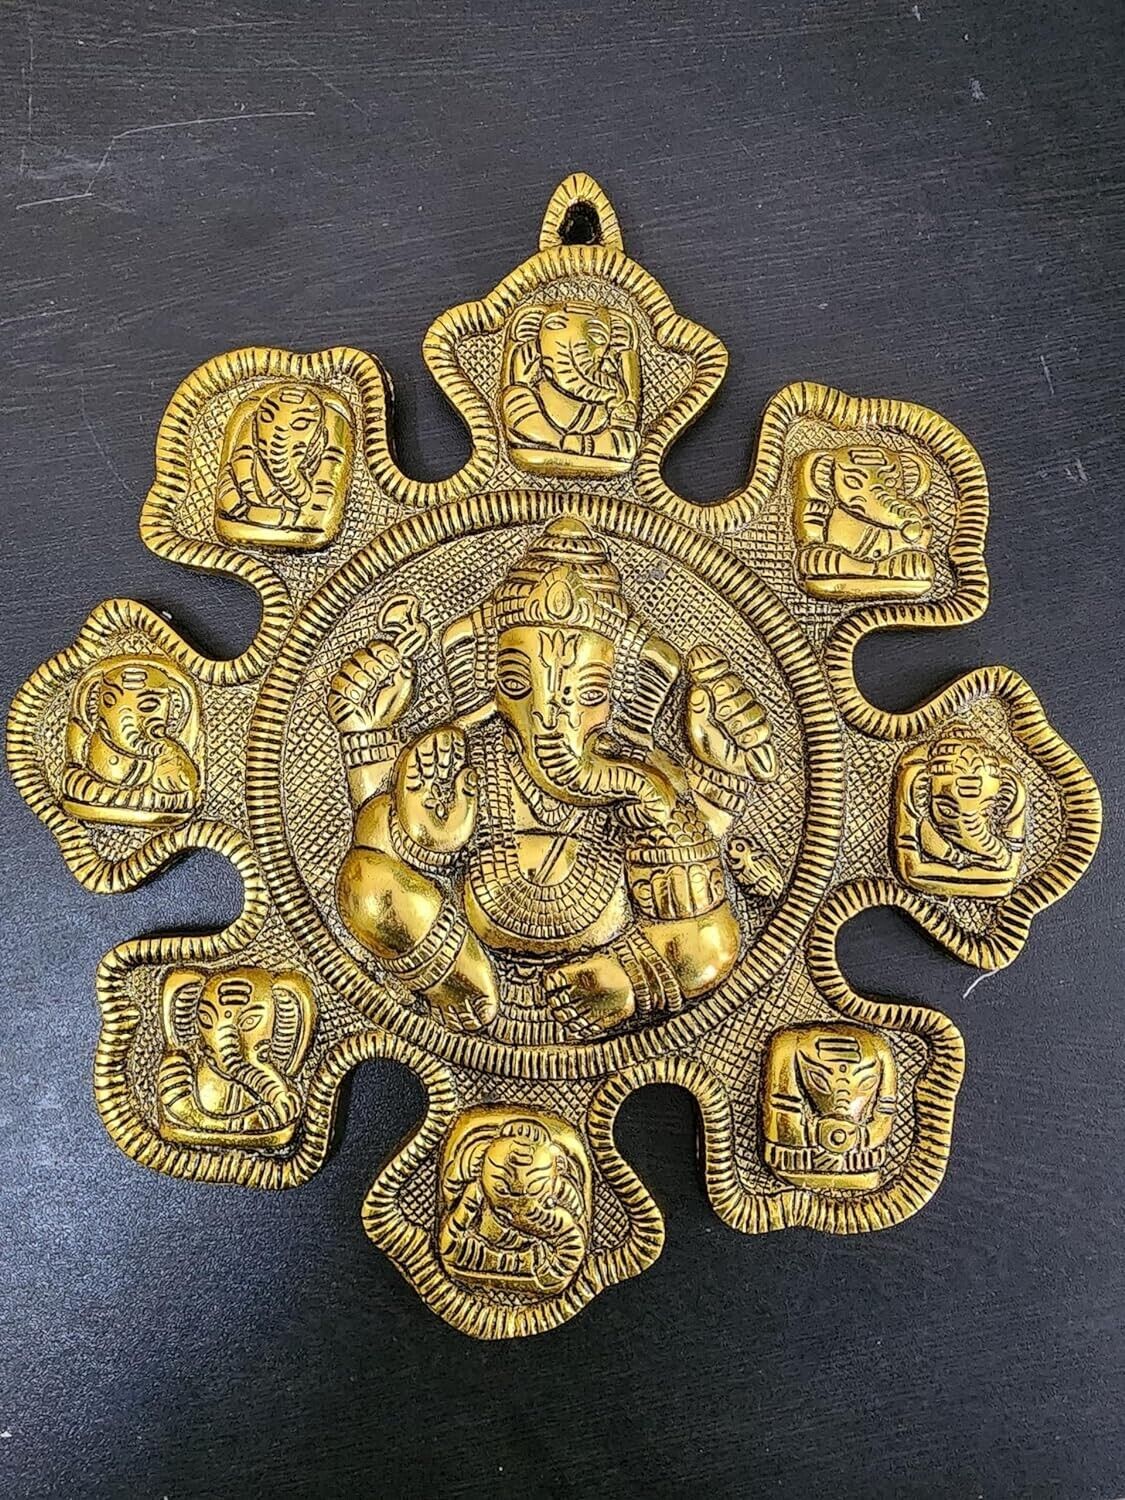 Divinely Inspired Asthmukhi Ganesh Wall Hanging Eight Faced Lord Ganesha